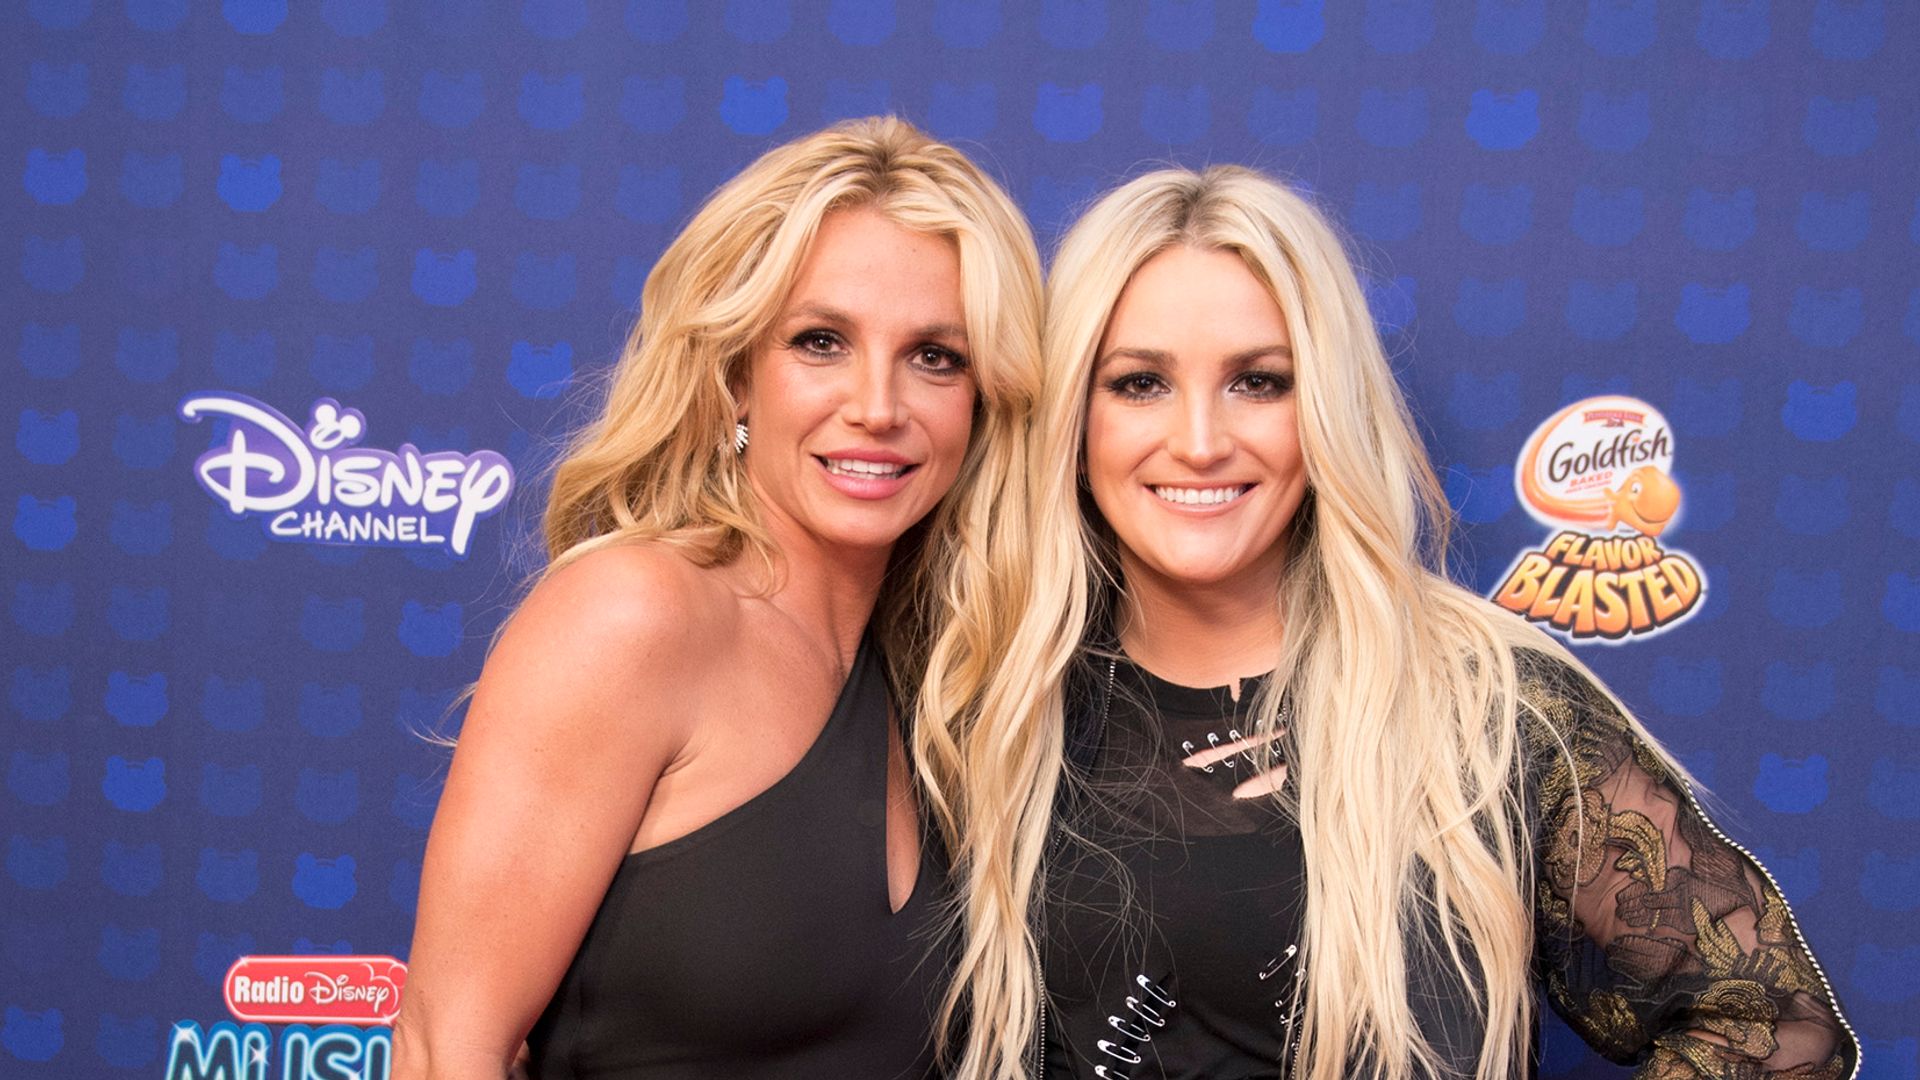 Britney Spears and Jamie Lynn Spears at the 2017 Radio Disney Music Awards at Microsoft Theater in Los Angeles on Saturday, April 29